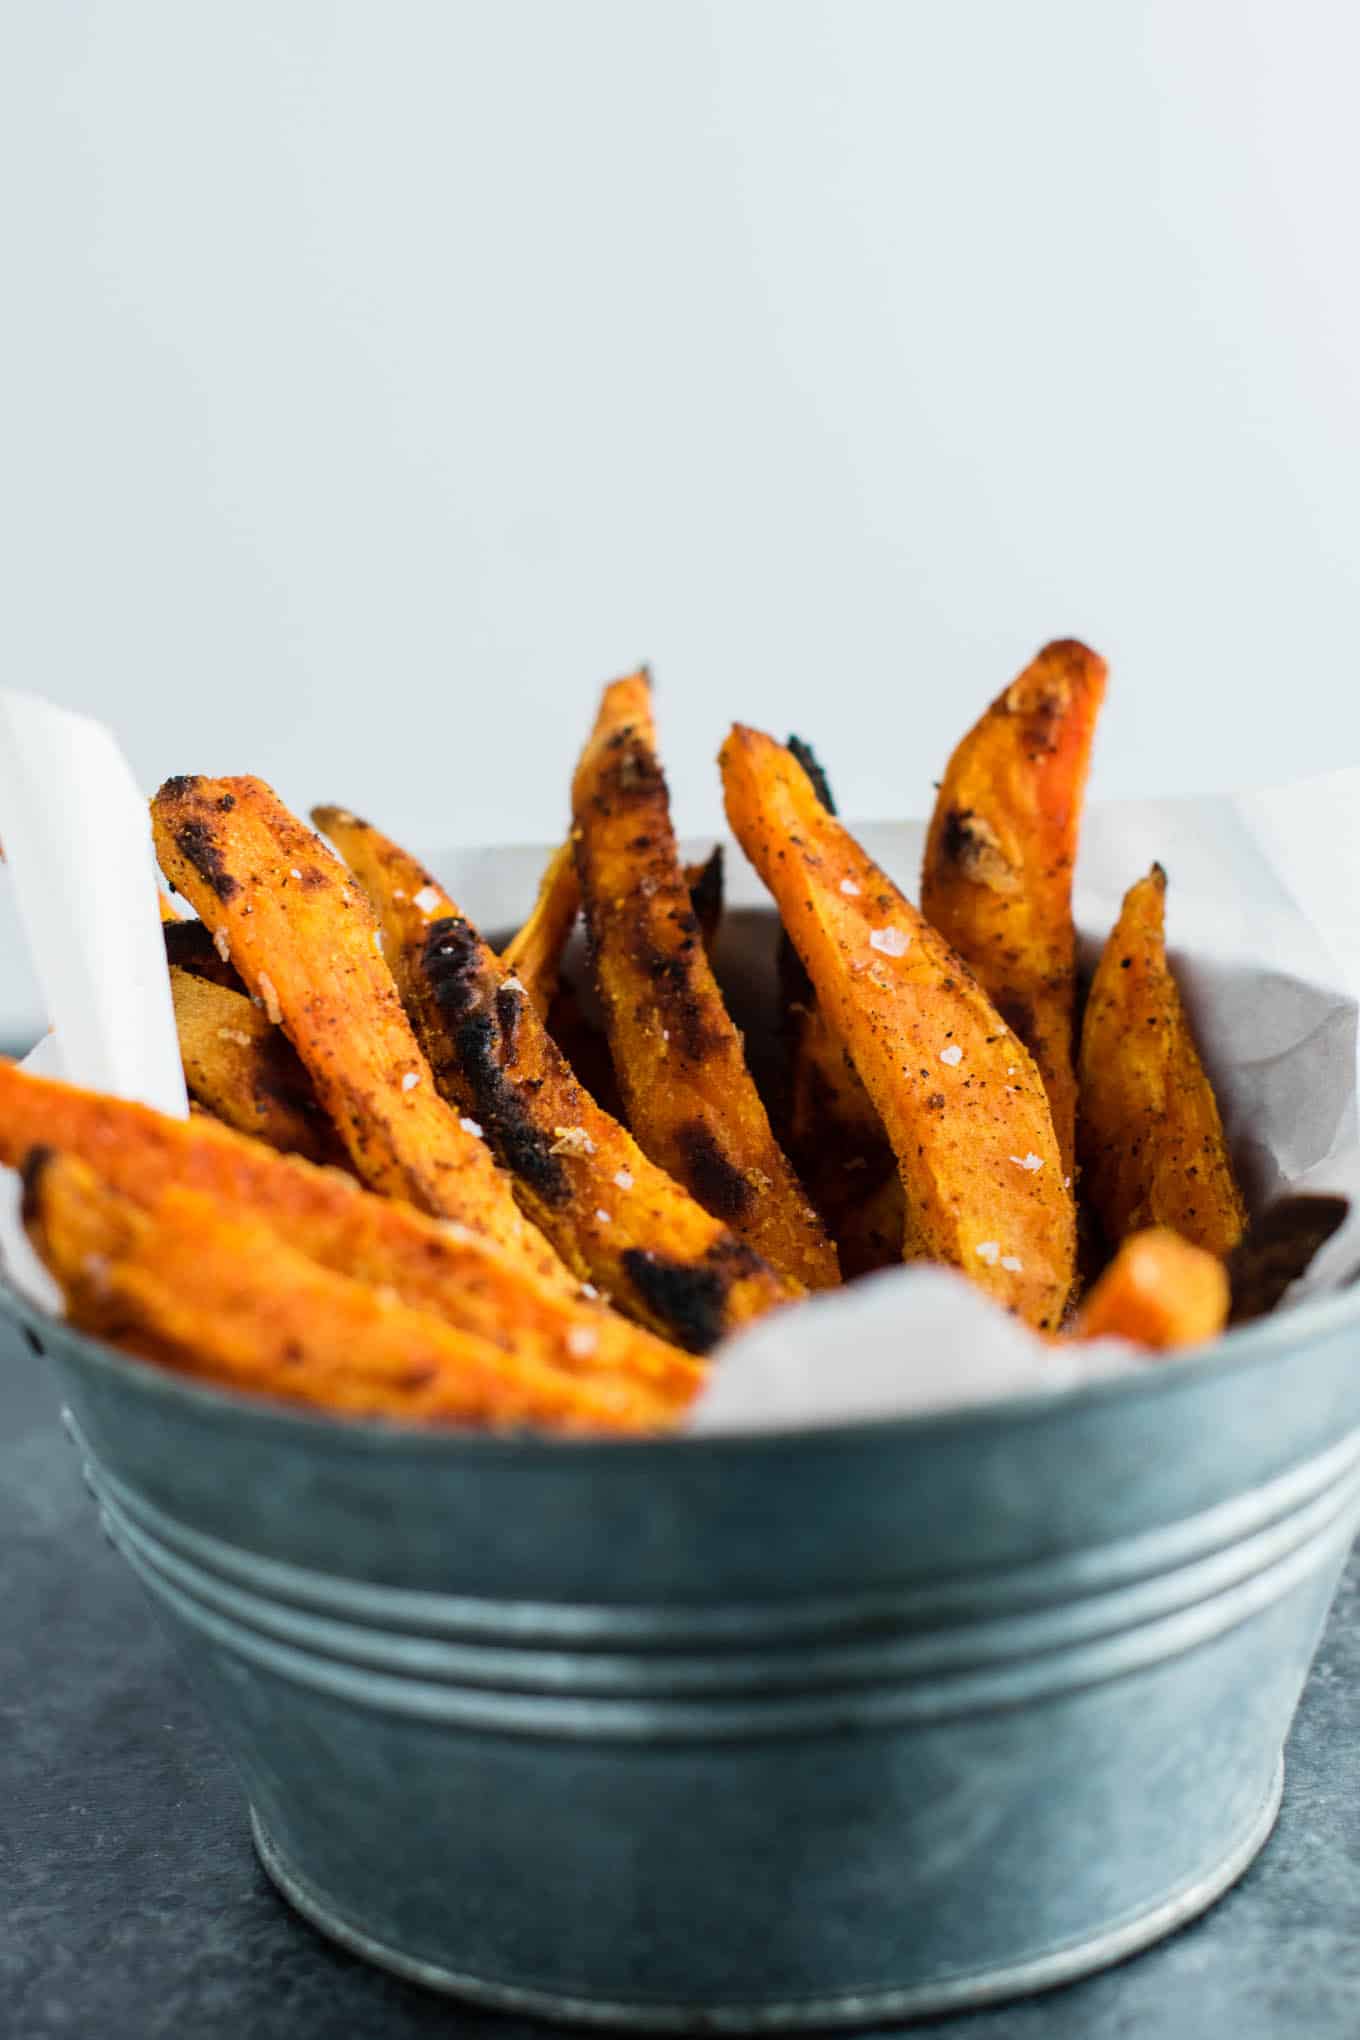 I am obsessed with these roasted sweet potato fries! The perfect combo of salty sweet and the spices are perfect. So easy and go with everything! #sweetpotatofries #vegetables #sidedish #vegan #dinner #roastedsweetpotatofries